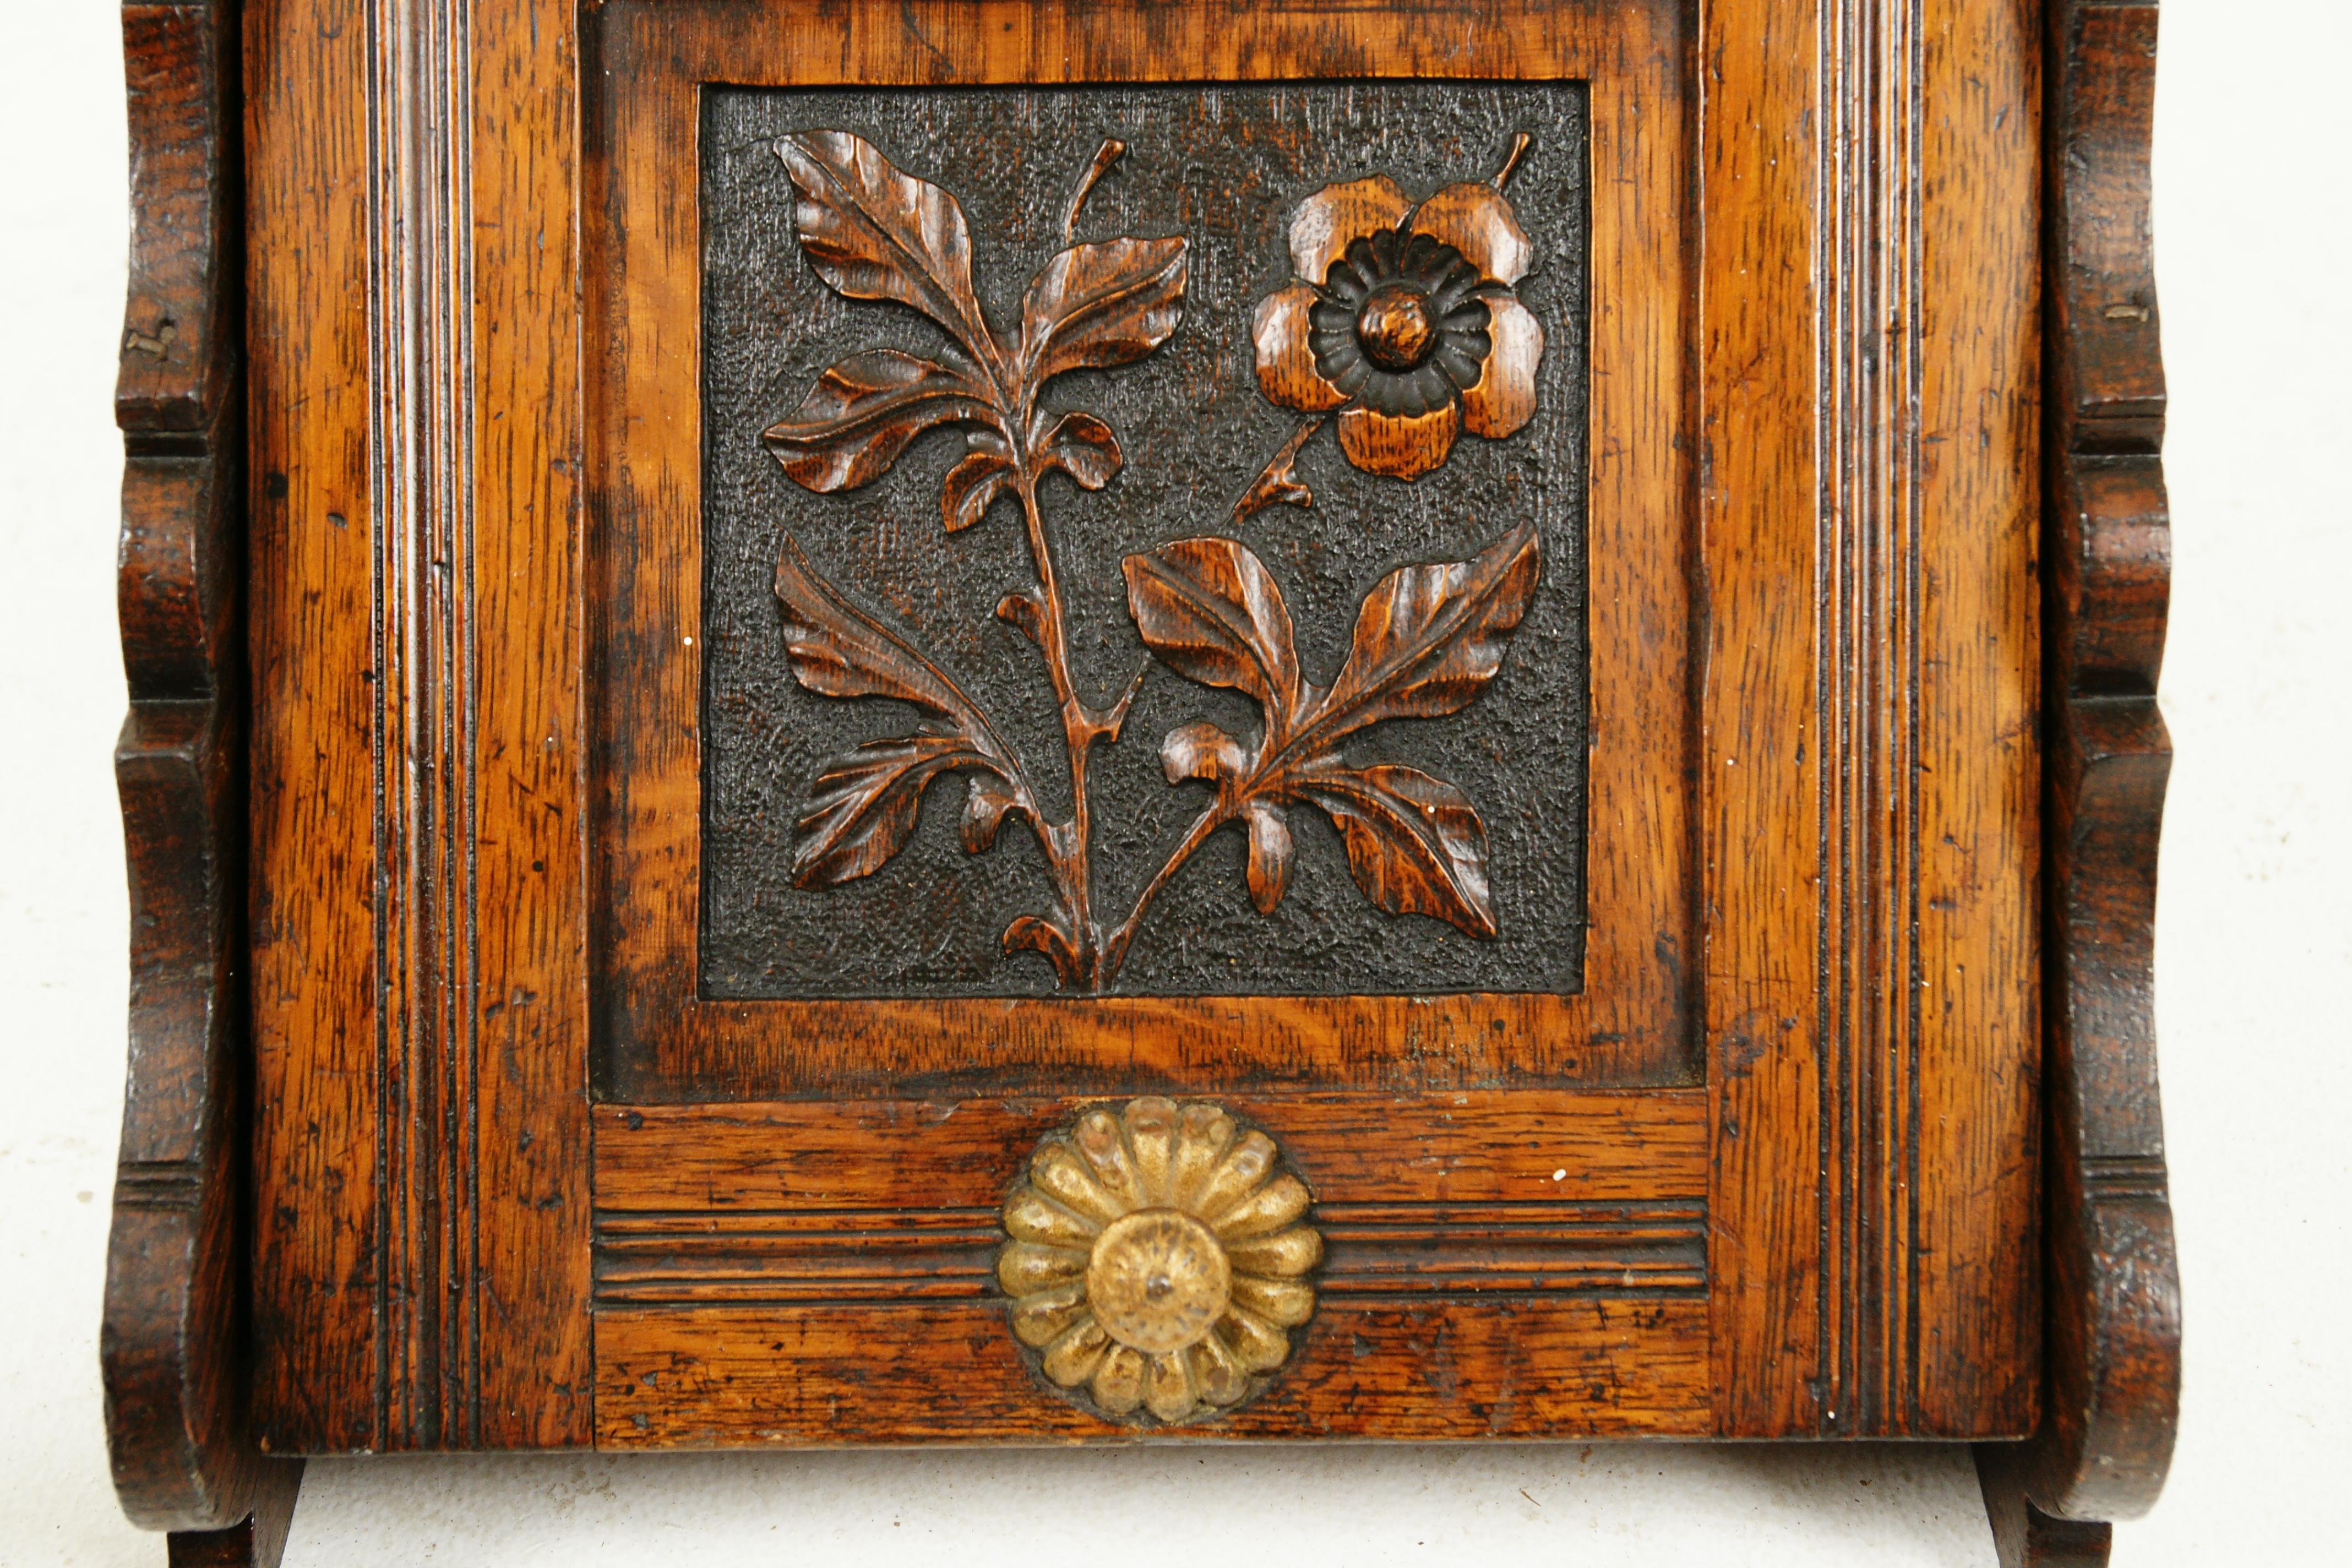 Antique oak coal box, fireplace coal box, liner, Scotland 1900, H169

Scotland, 1900
Solid oak
Original finish
Turned handle on the top with shaping front
Decorative carved floral design on front lid with brass knob
Interior has a fitted pull out